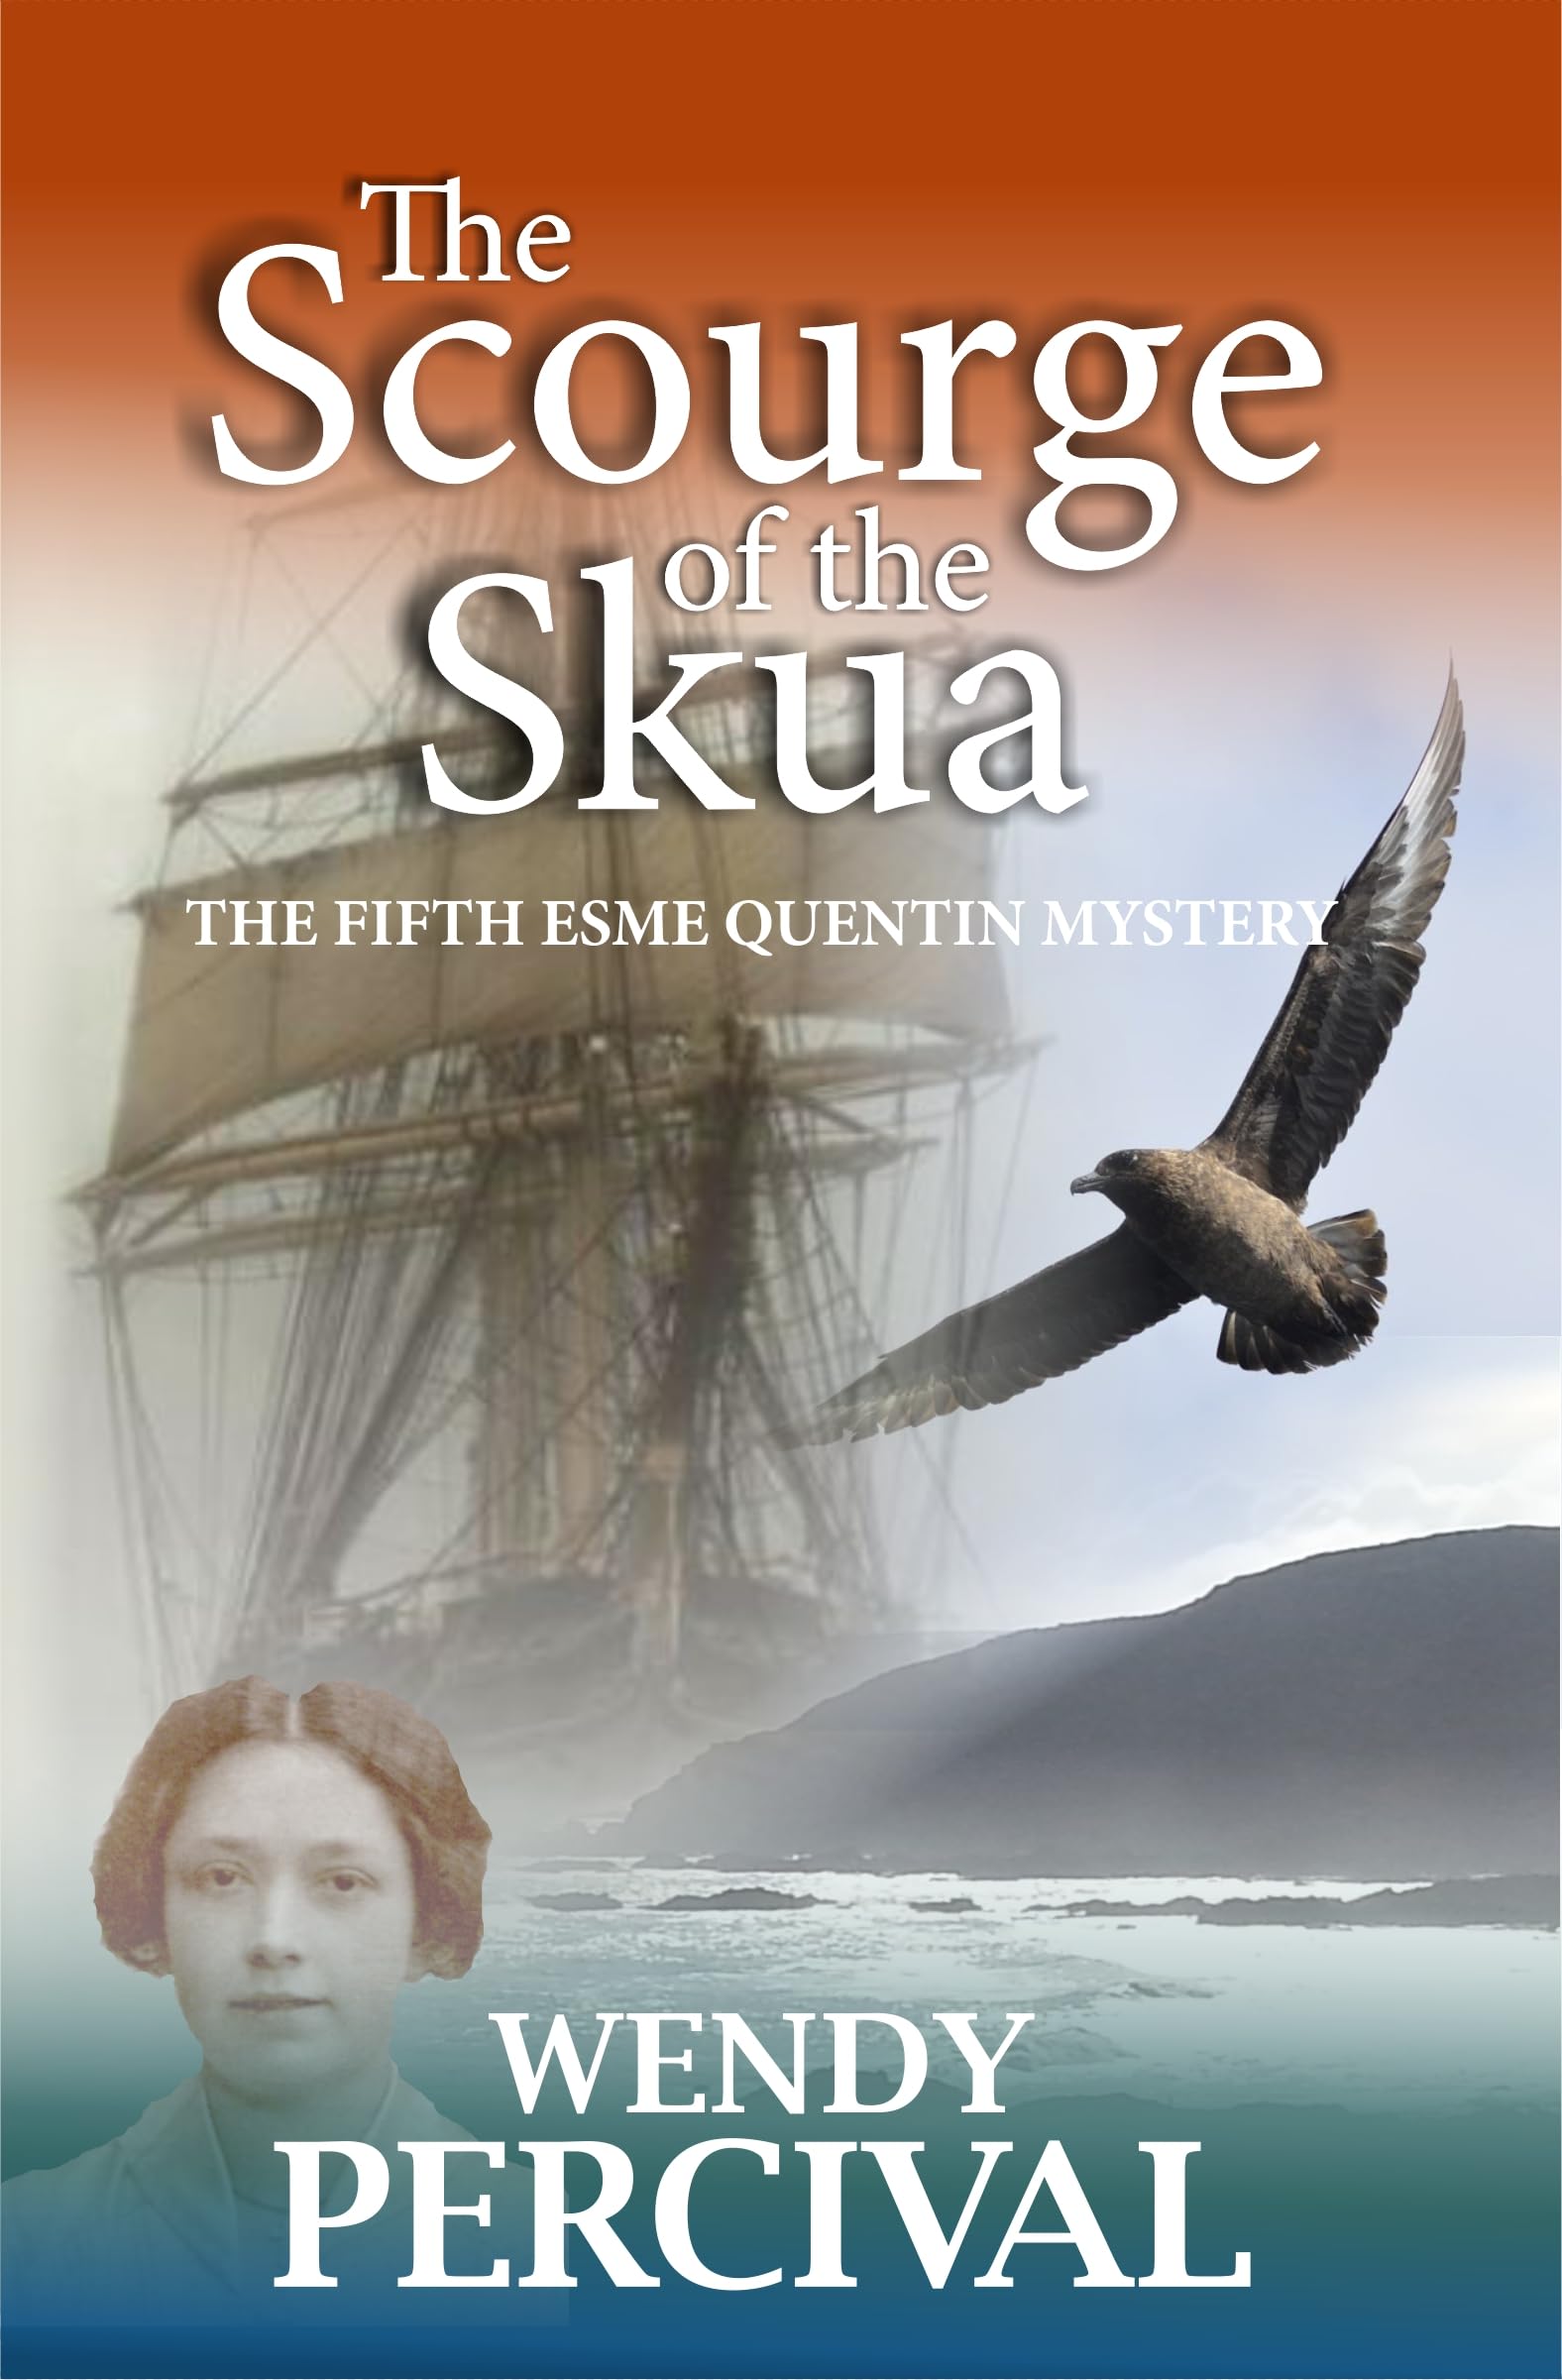 Wendy Percival: The Scourge of the Skua (Old Key Press)